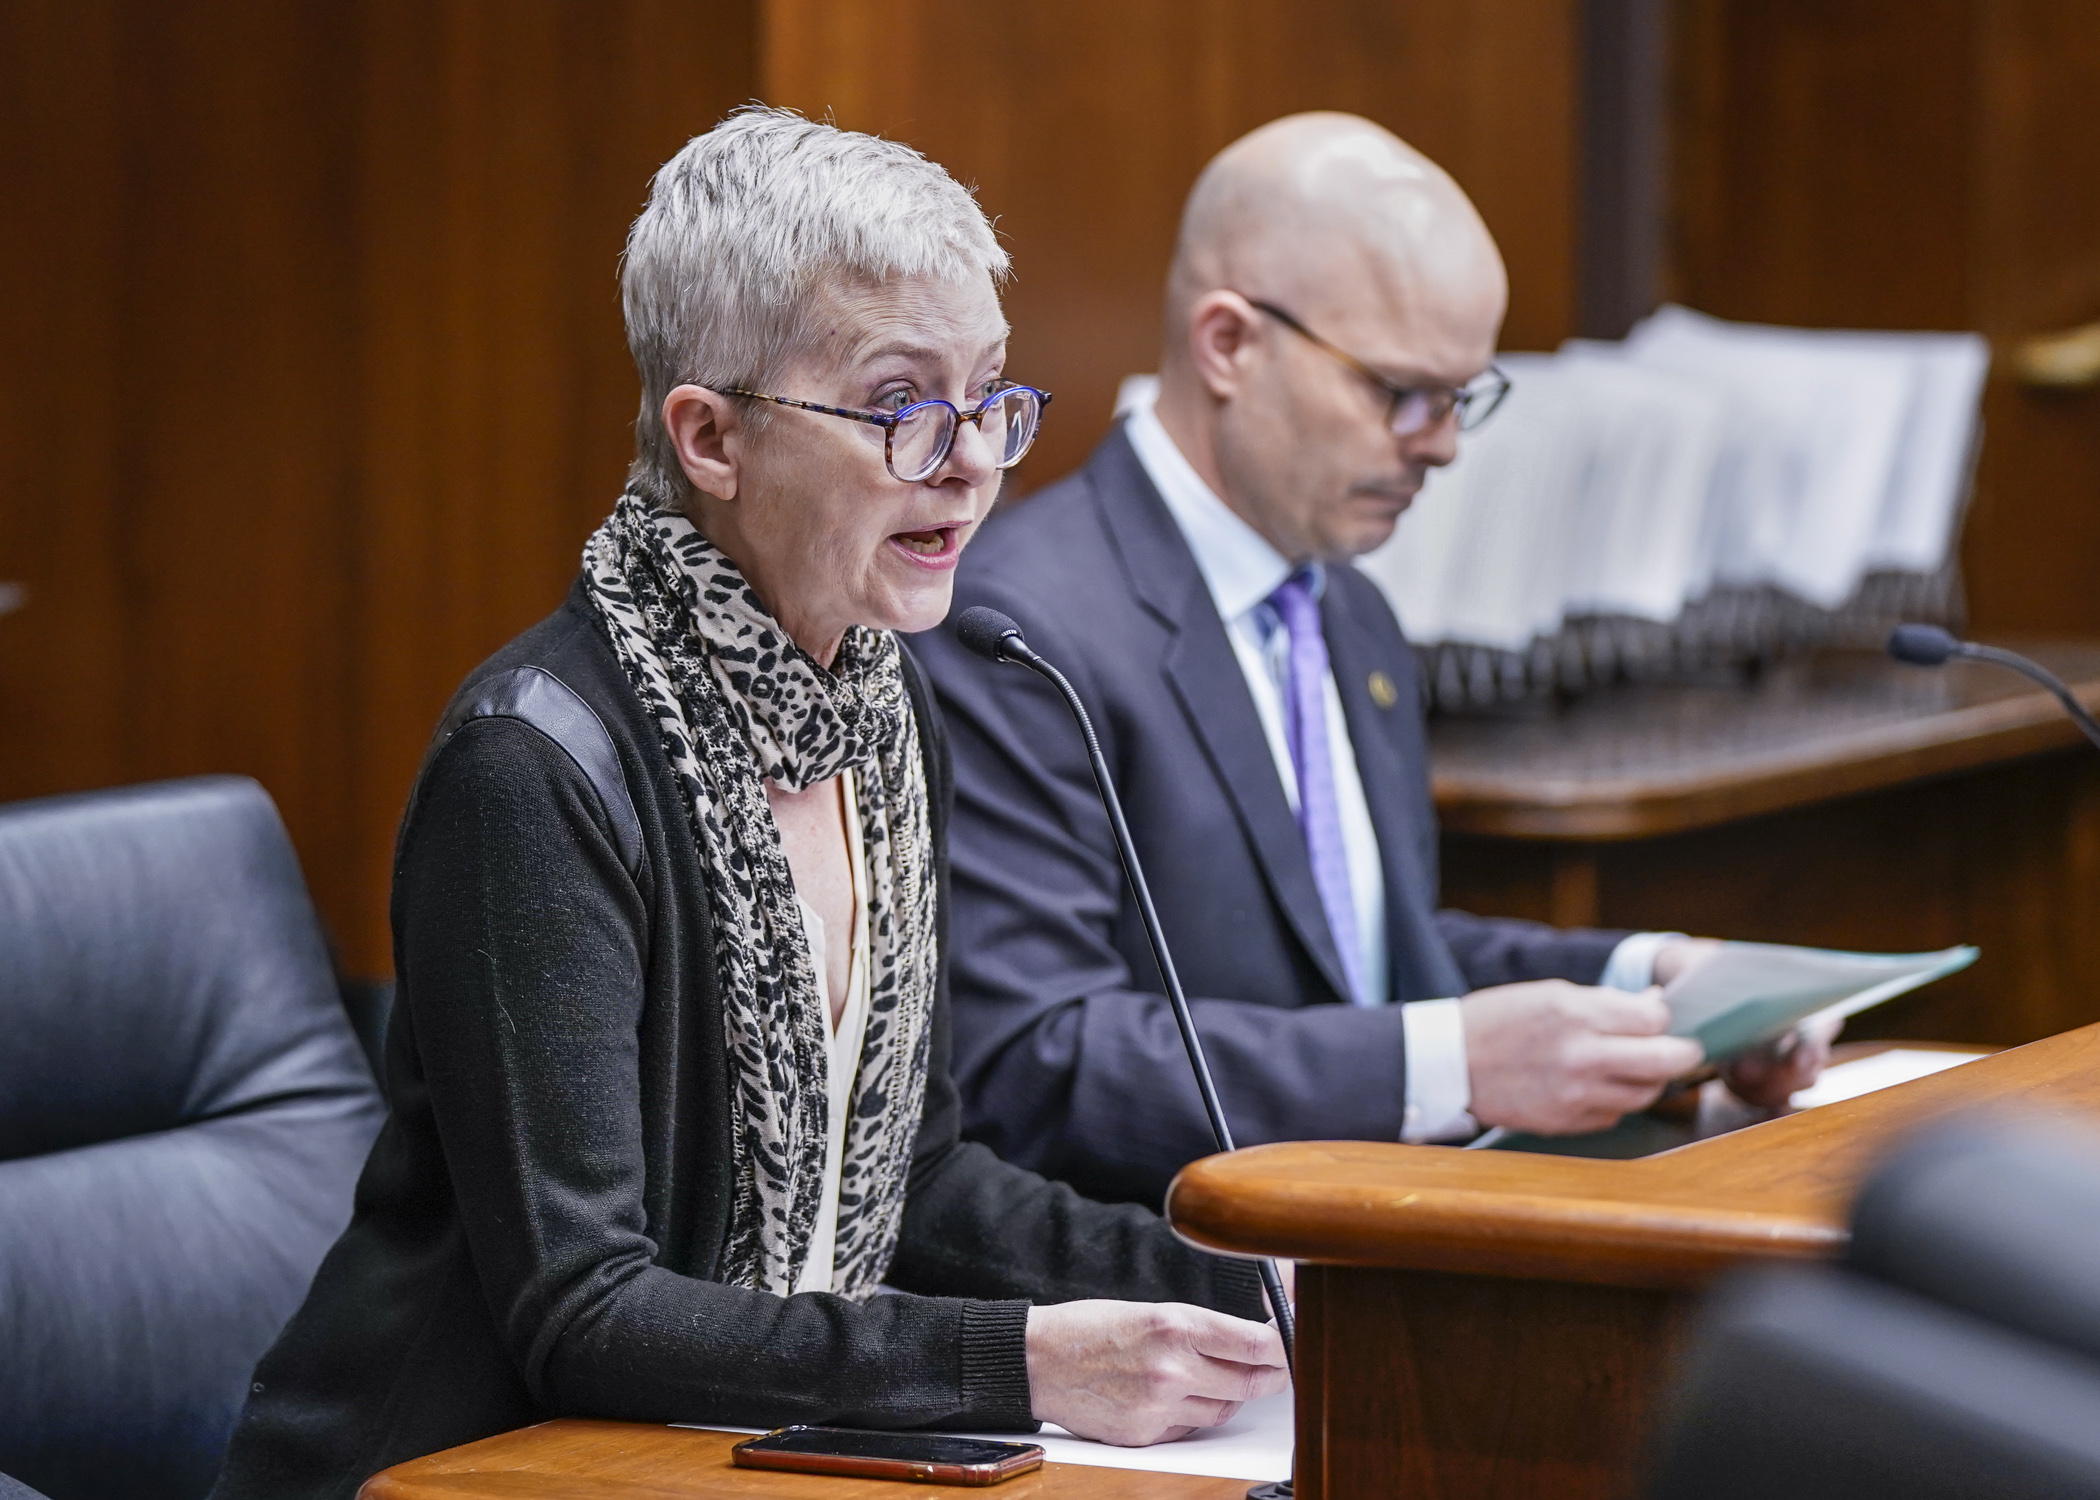 Melodie Bahan, executive director for Minnesota Film and TV, testifies before the House Economic Development Finance and Policy Committee March 10 in support of HF2059, which would extend film production tax credits in Minnesota. (Photo by Catherine Davis)